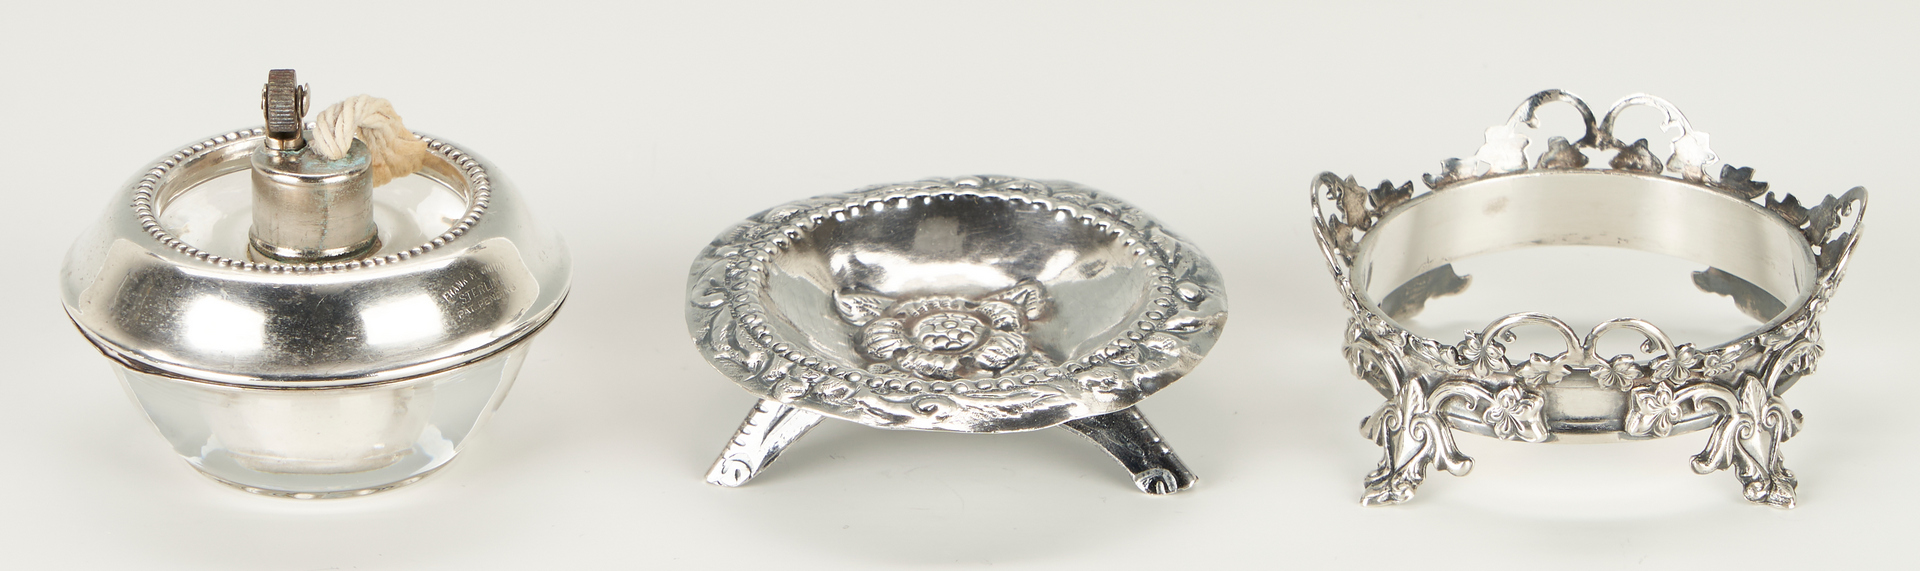 Lot 1255: 26 Assorted Sterling Items, incl. Napkin Rings, Butter Pats and Mug